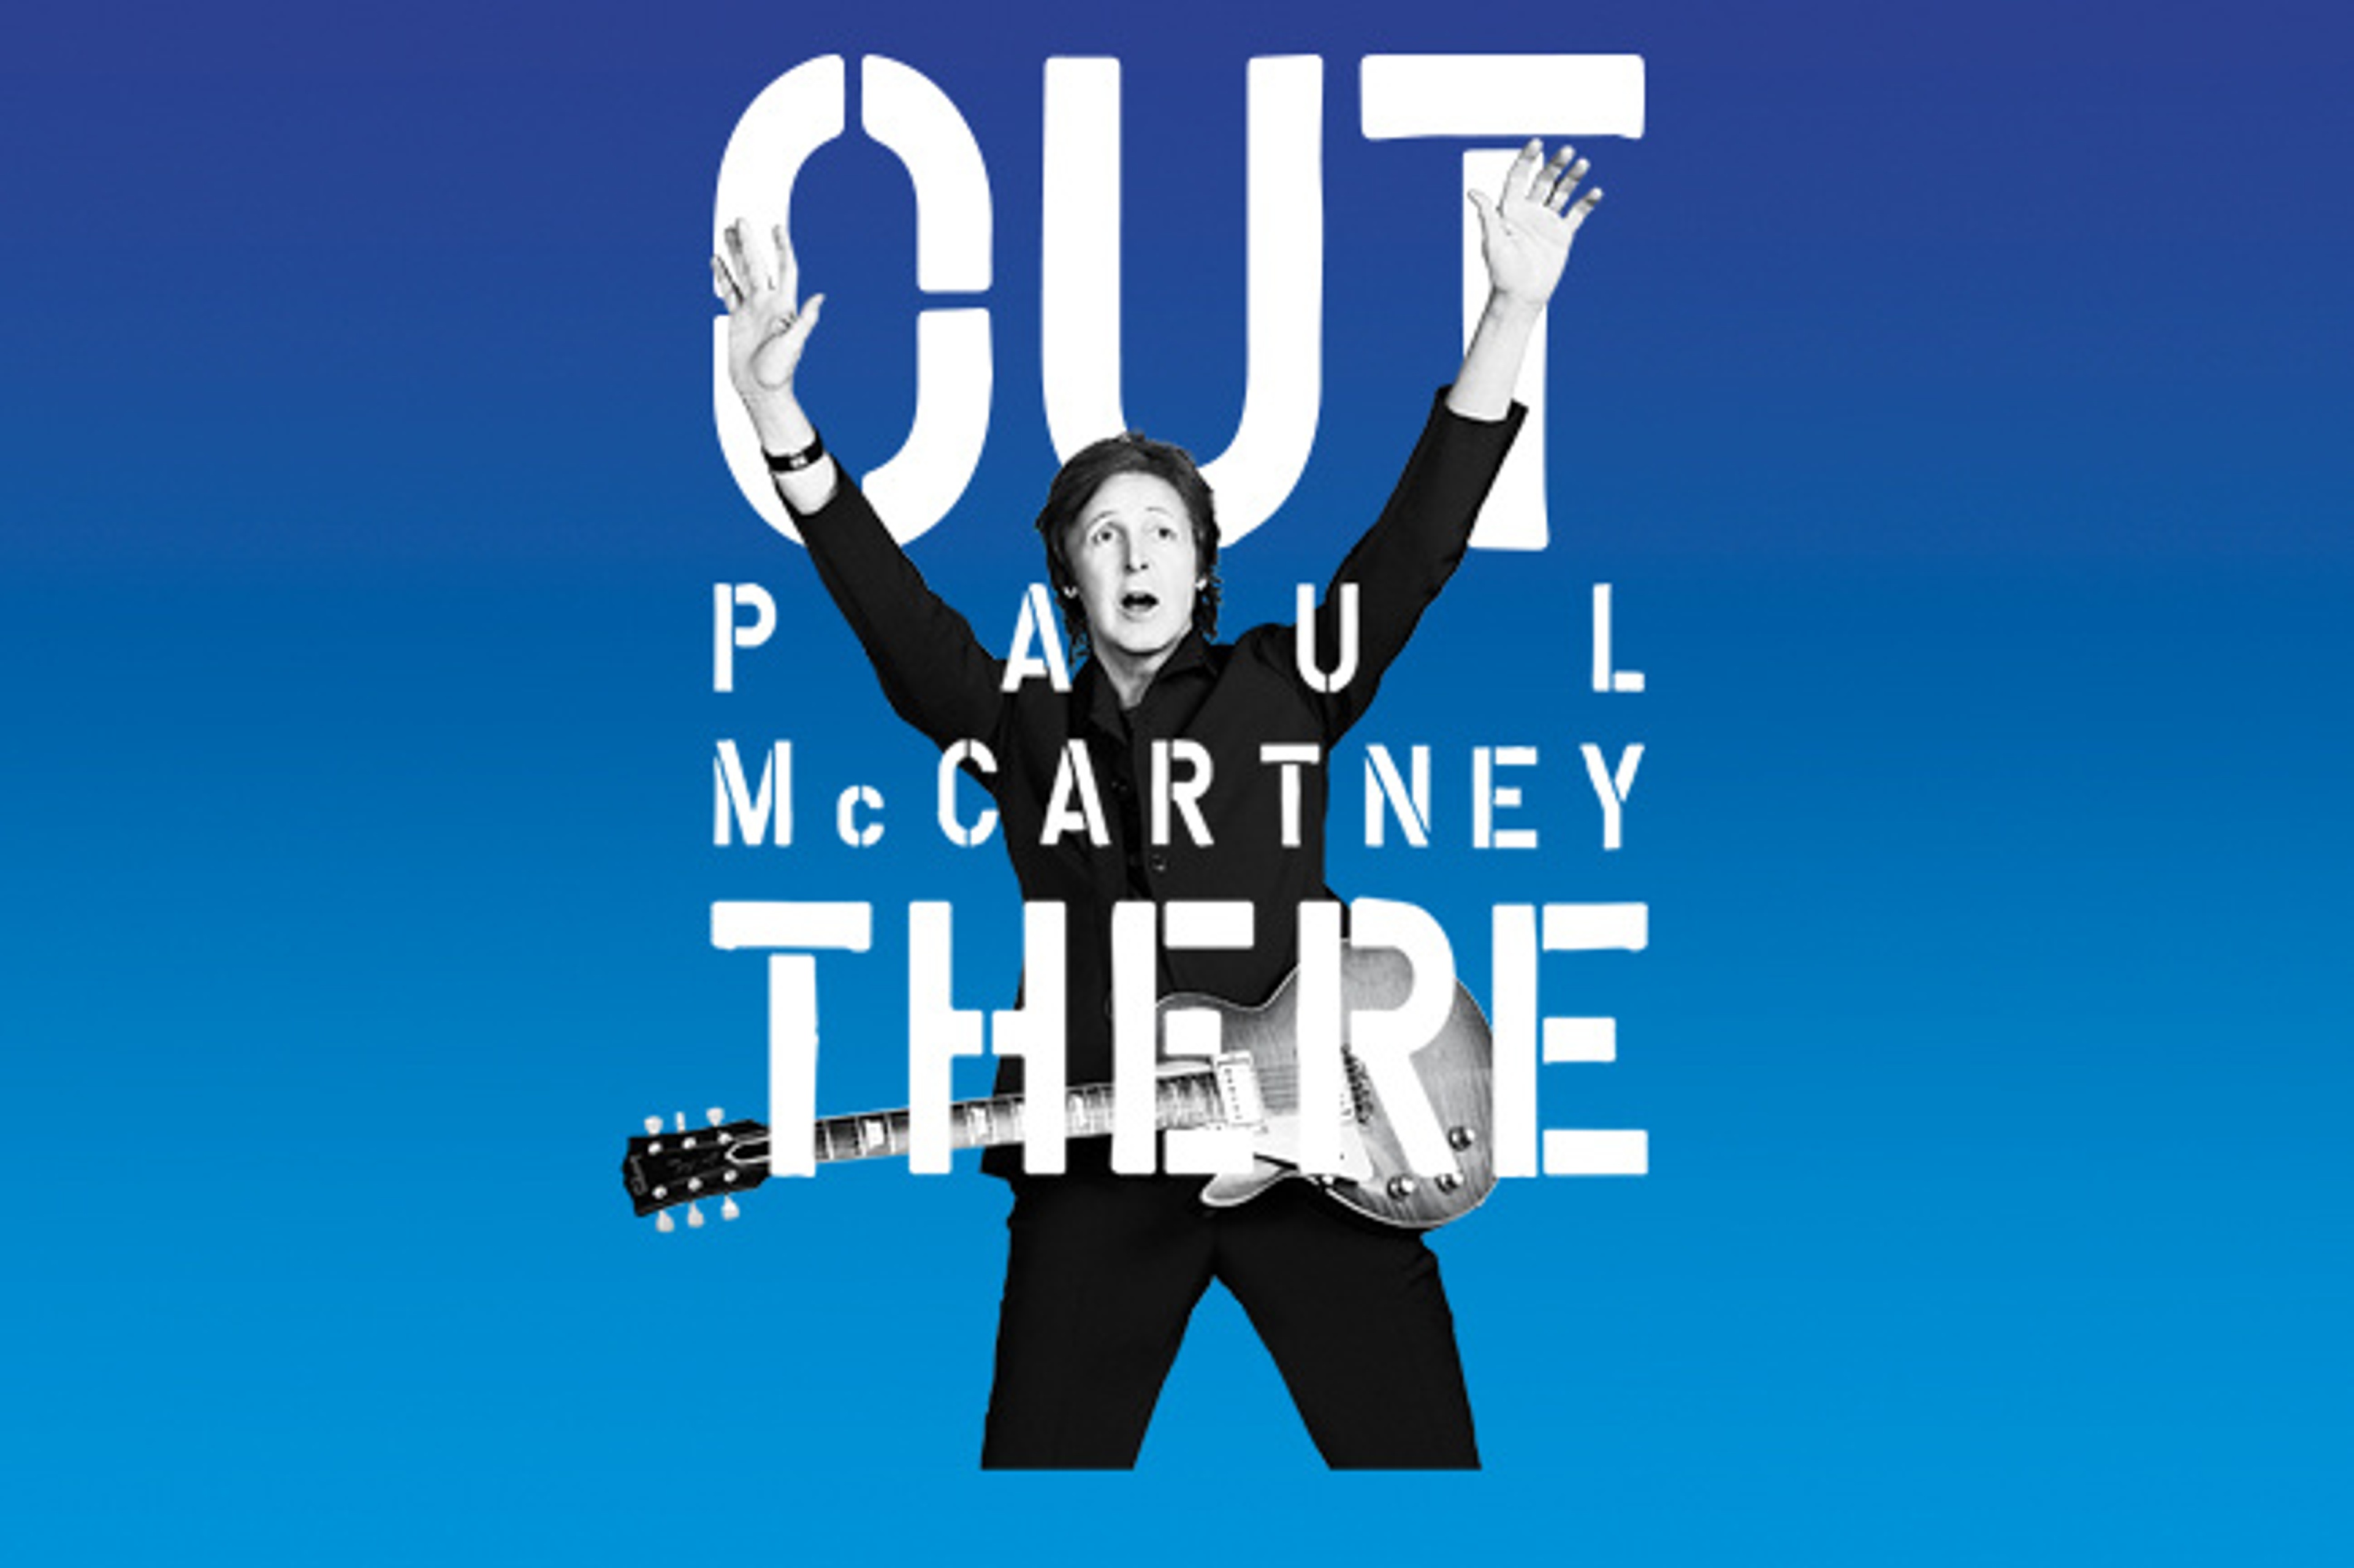 New Video: Paul is getting #OutThere in Japan